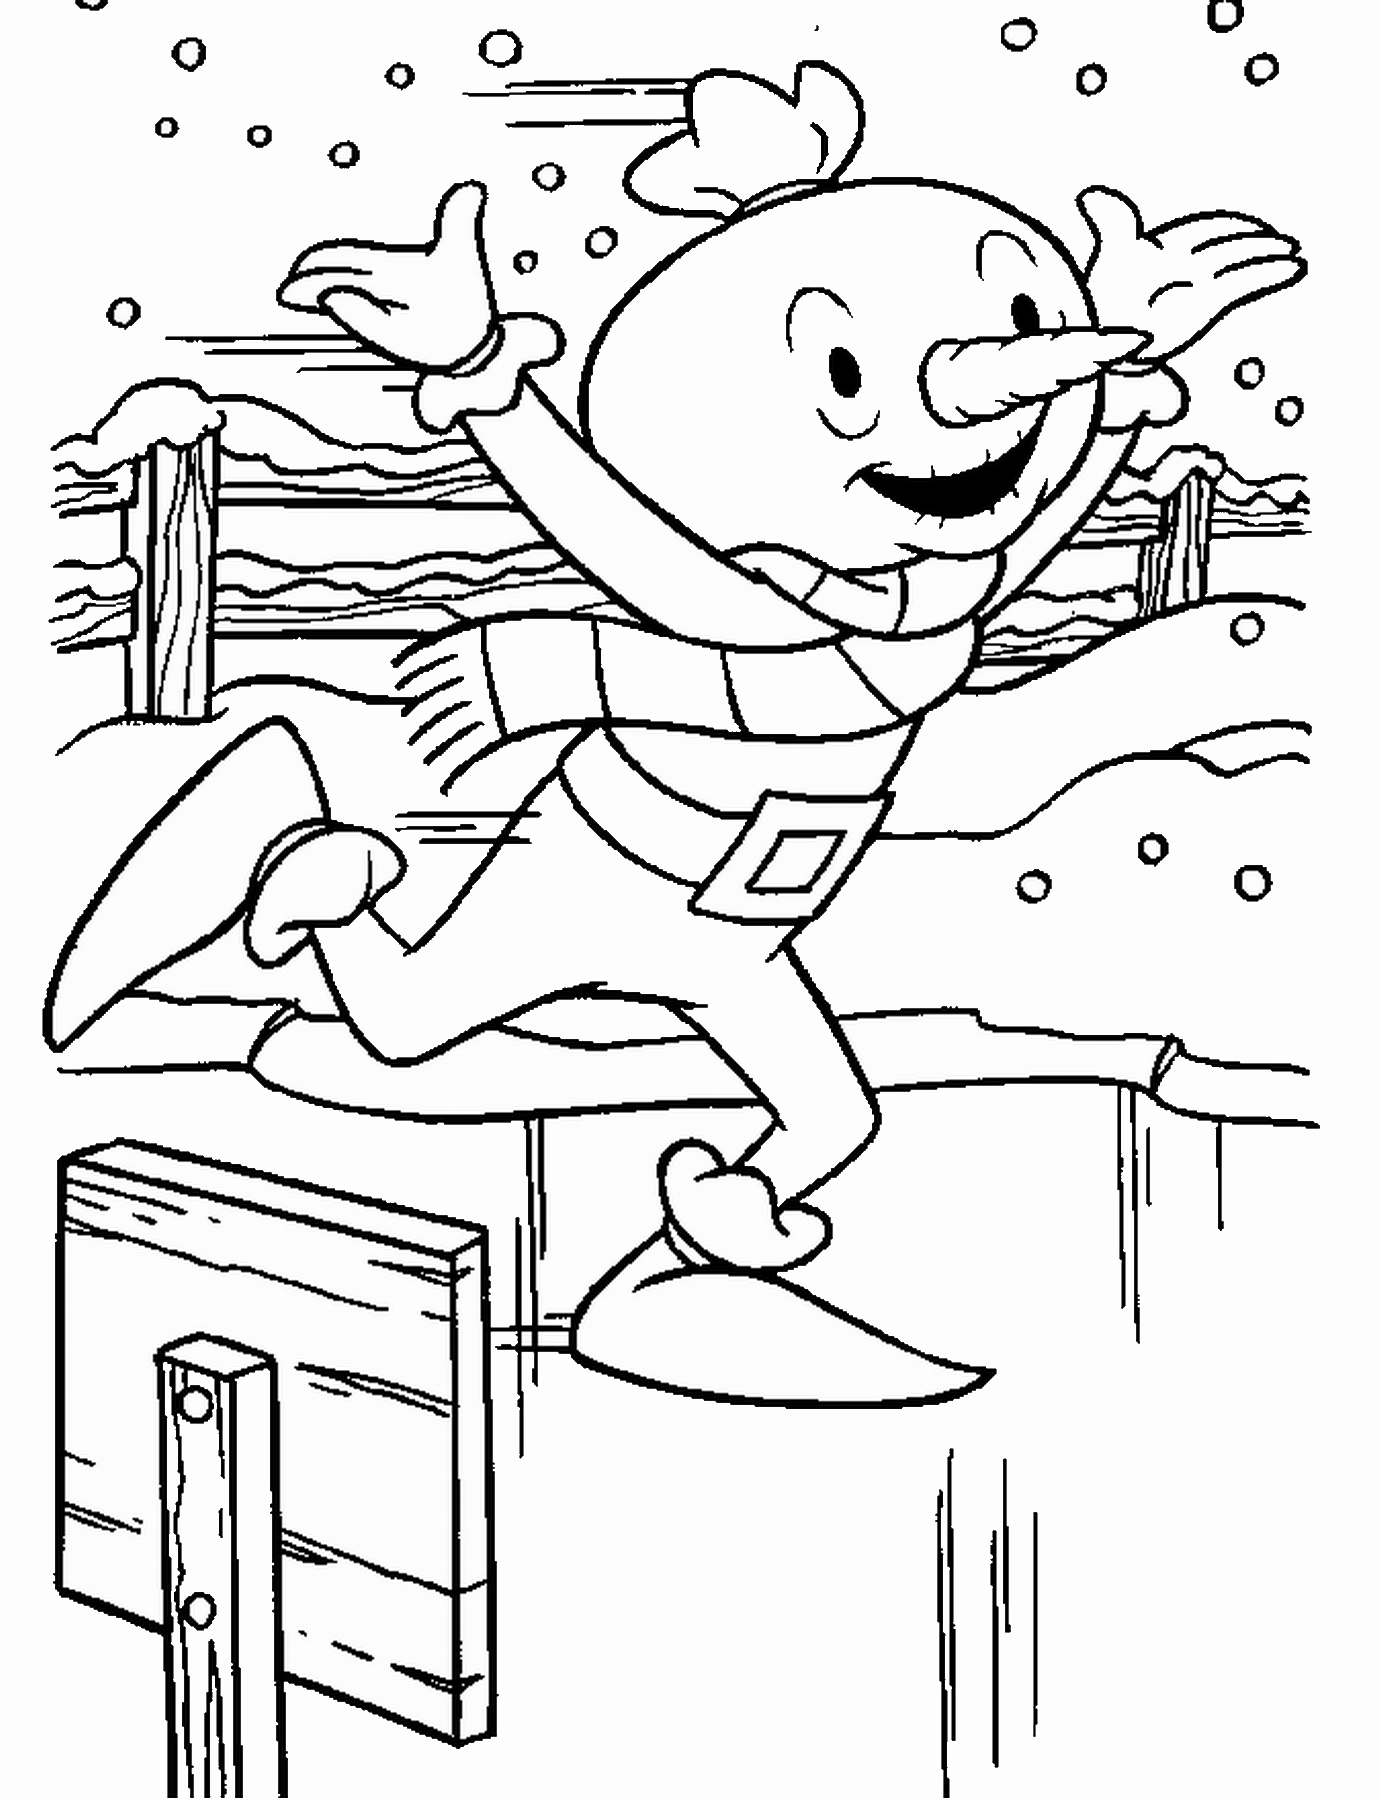 Bob the Builder Coloring Pages TV Film bob the builder_29 Printable 2020 00979 Coloring4free